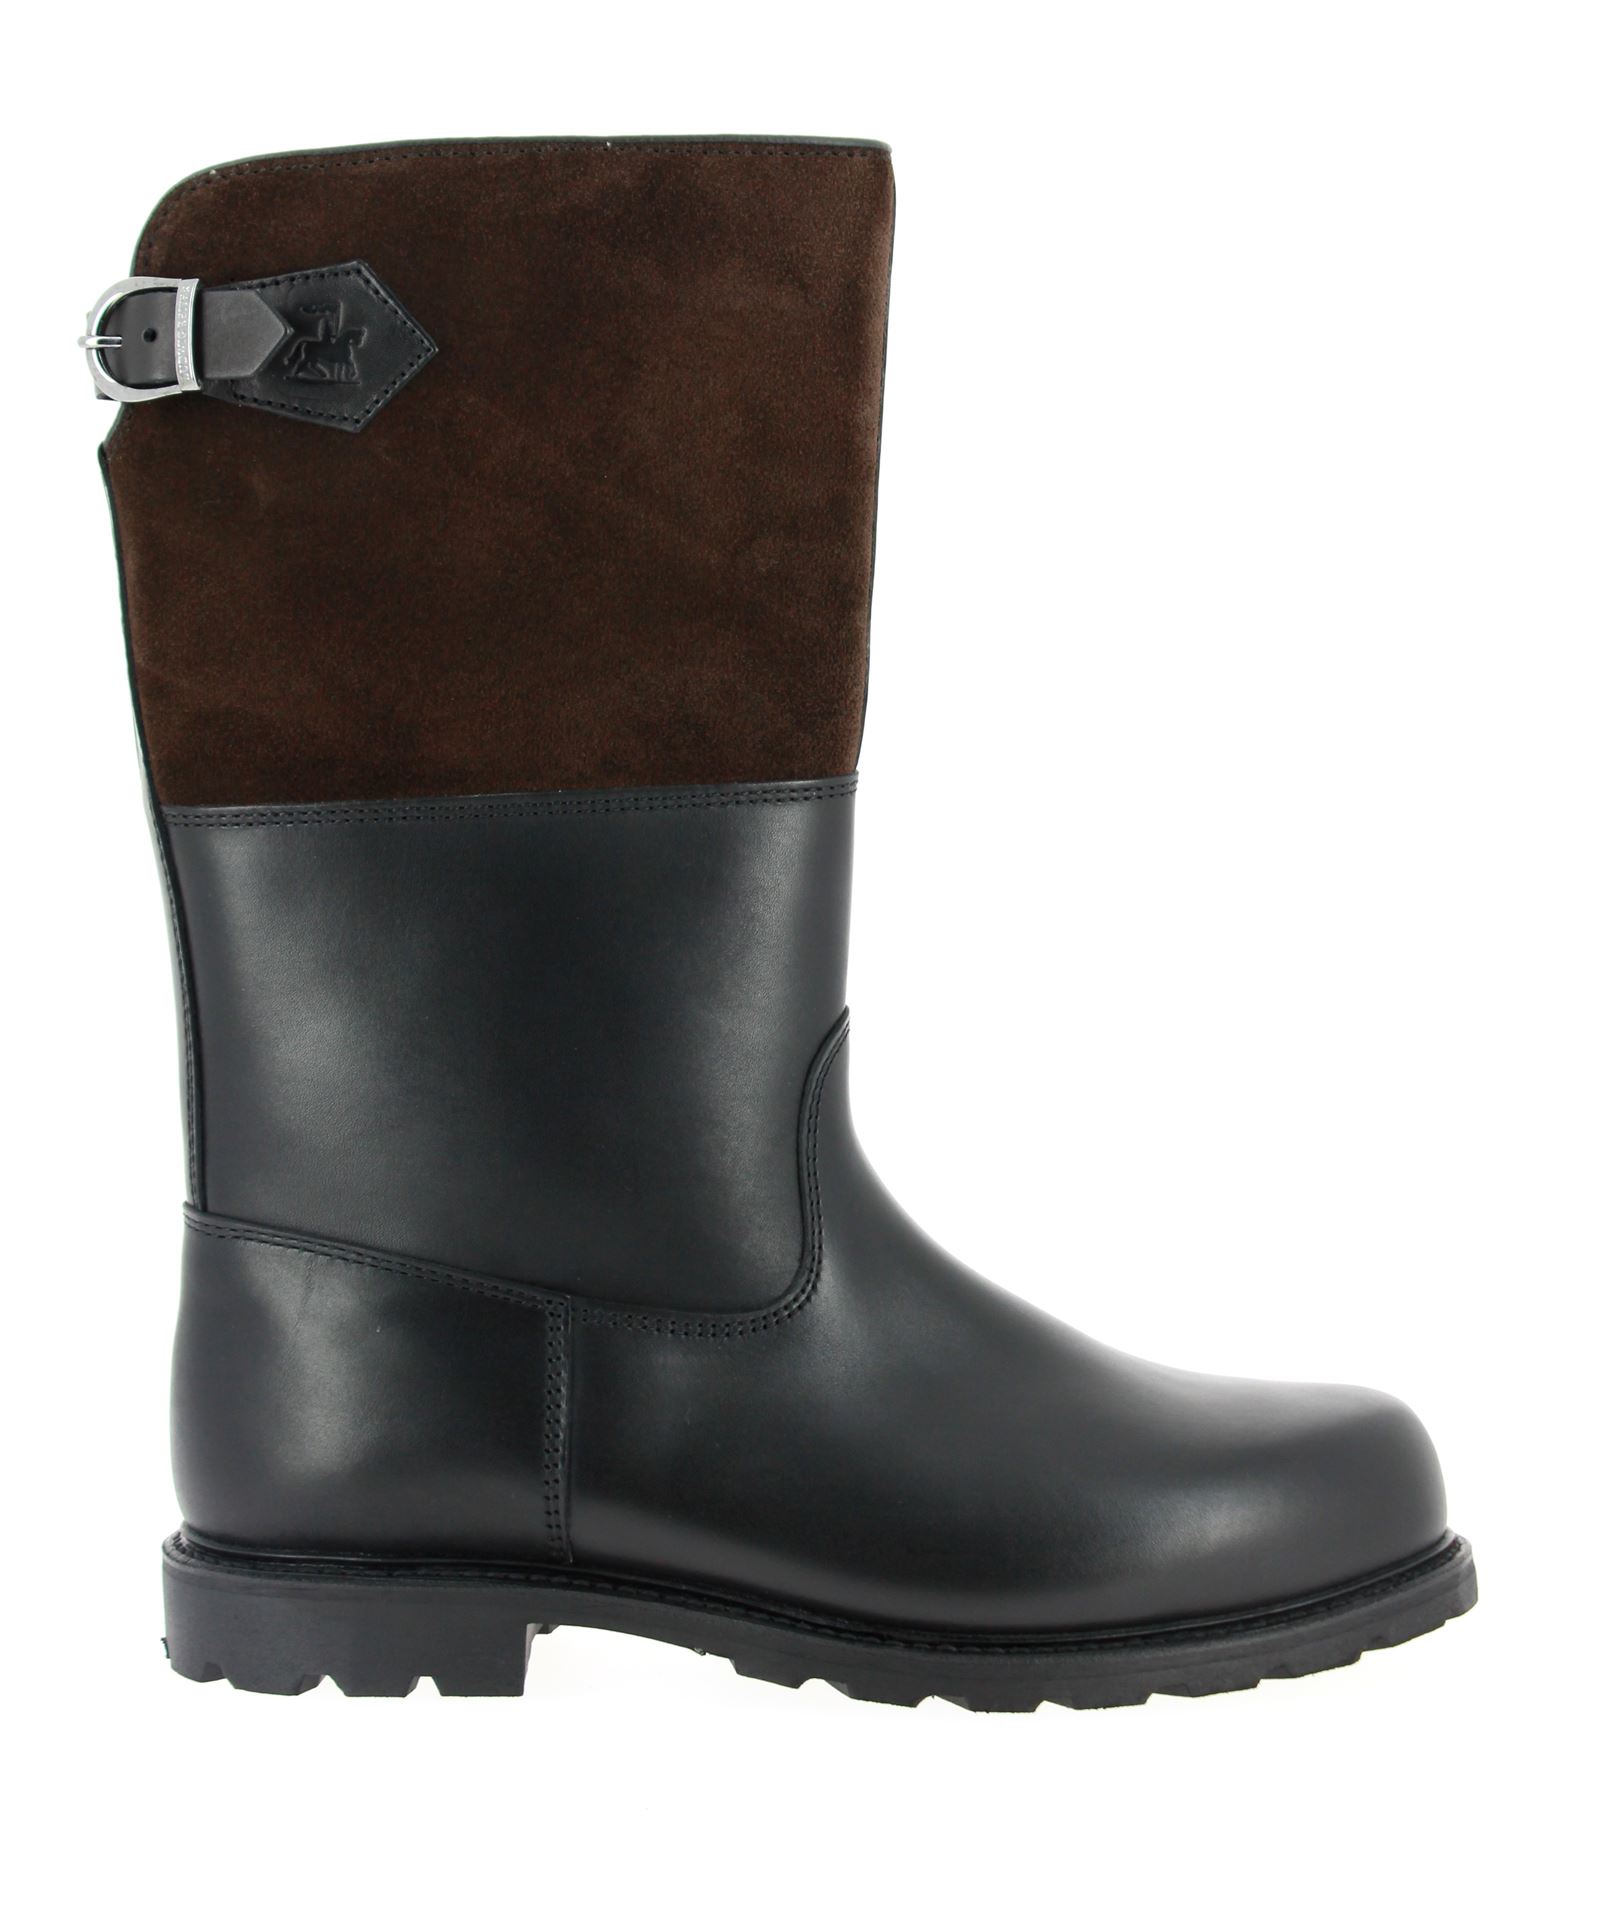 Ludwig Reiter Boot MARONIBRATER BLACK BROWN